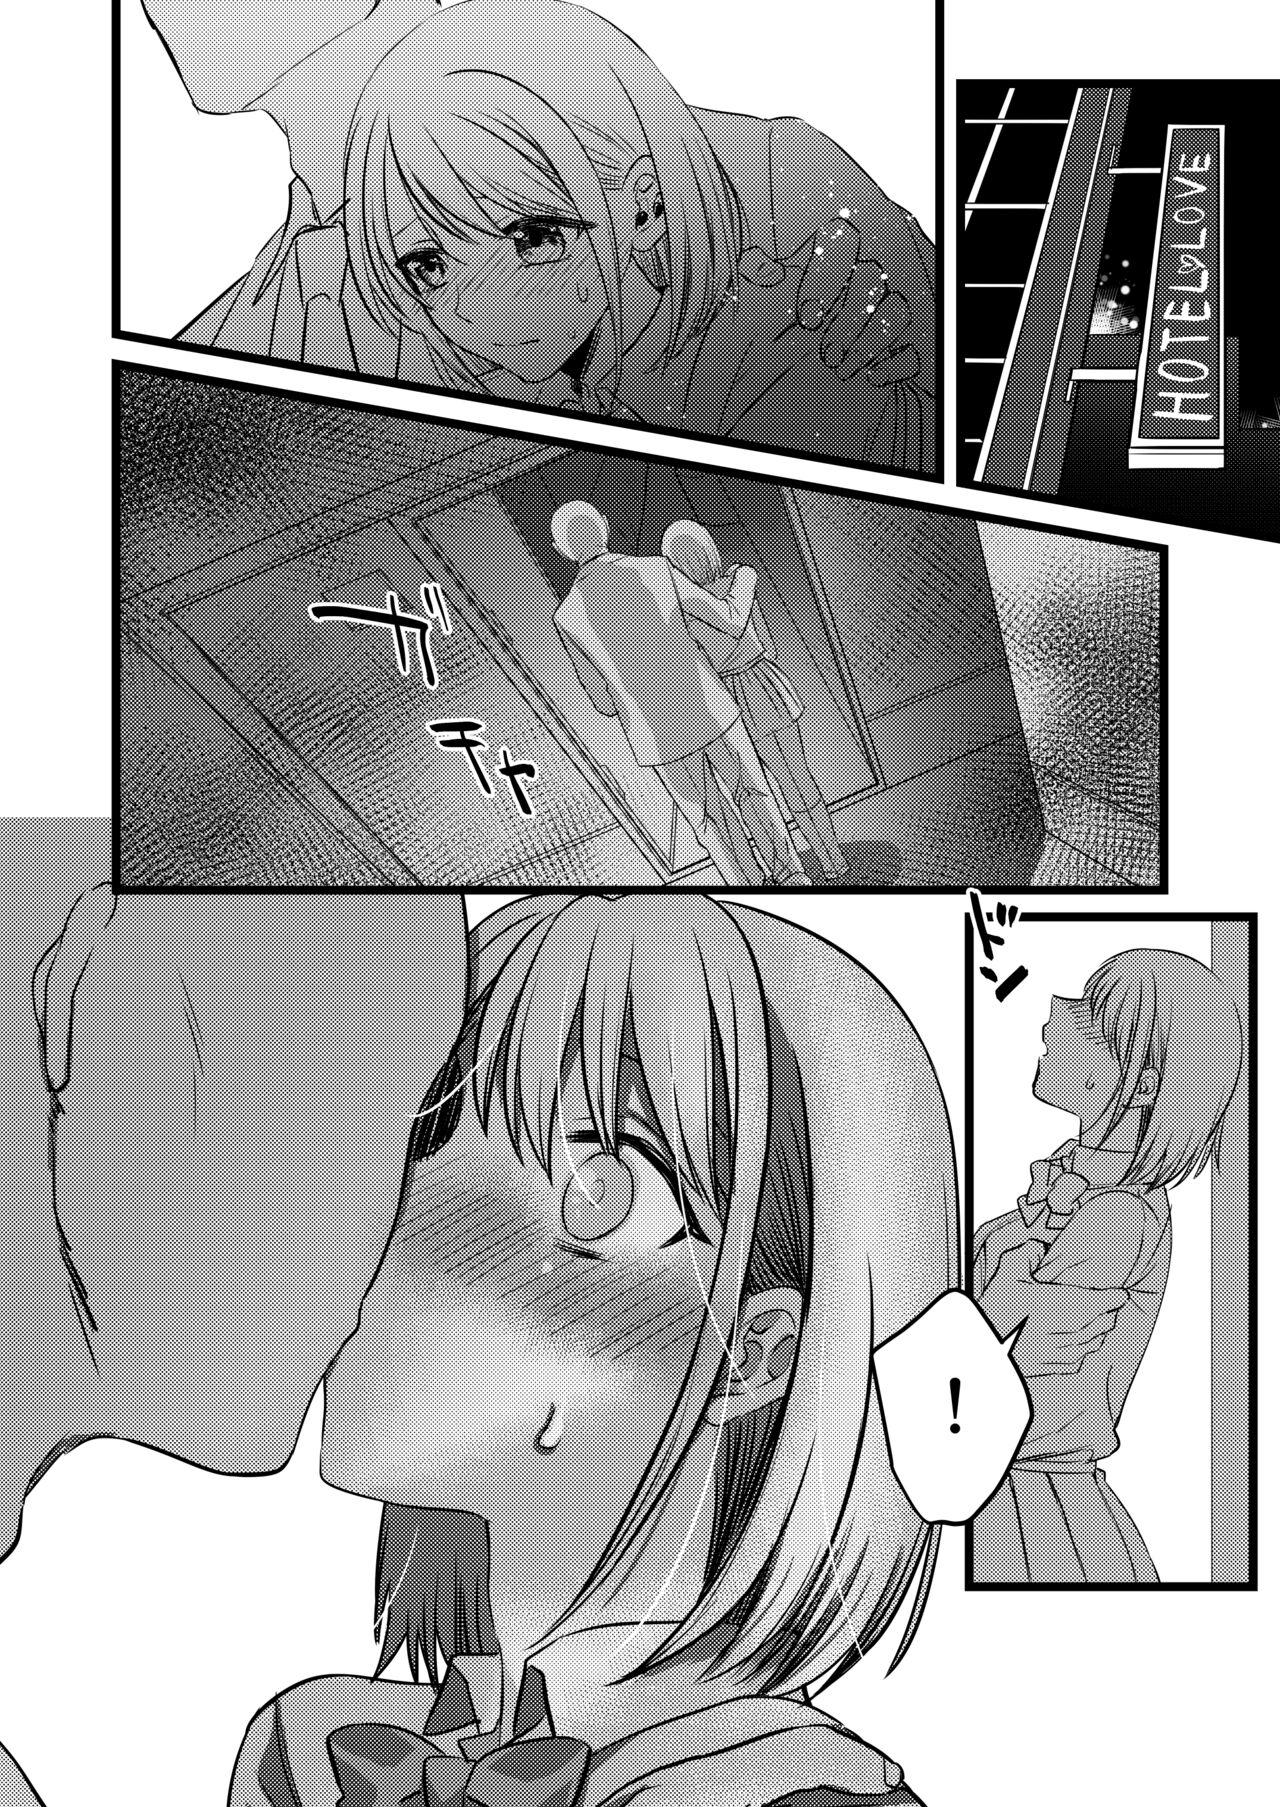 Femdom Pov 電車痴漢JKその後 From - Page 1